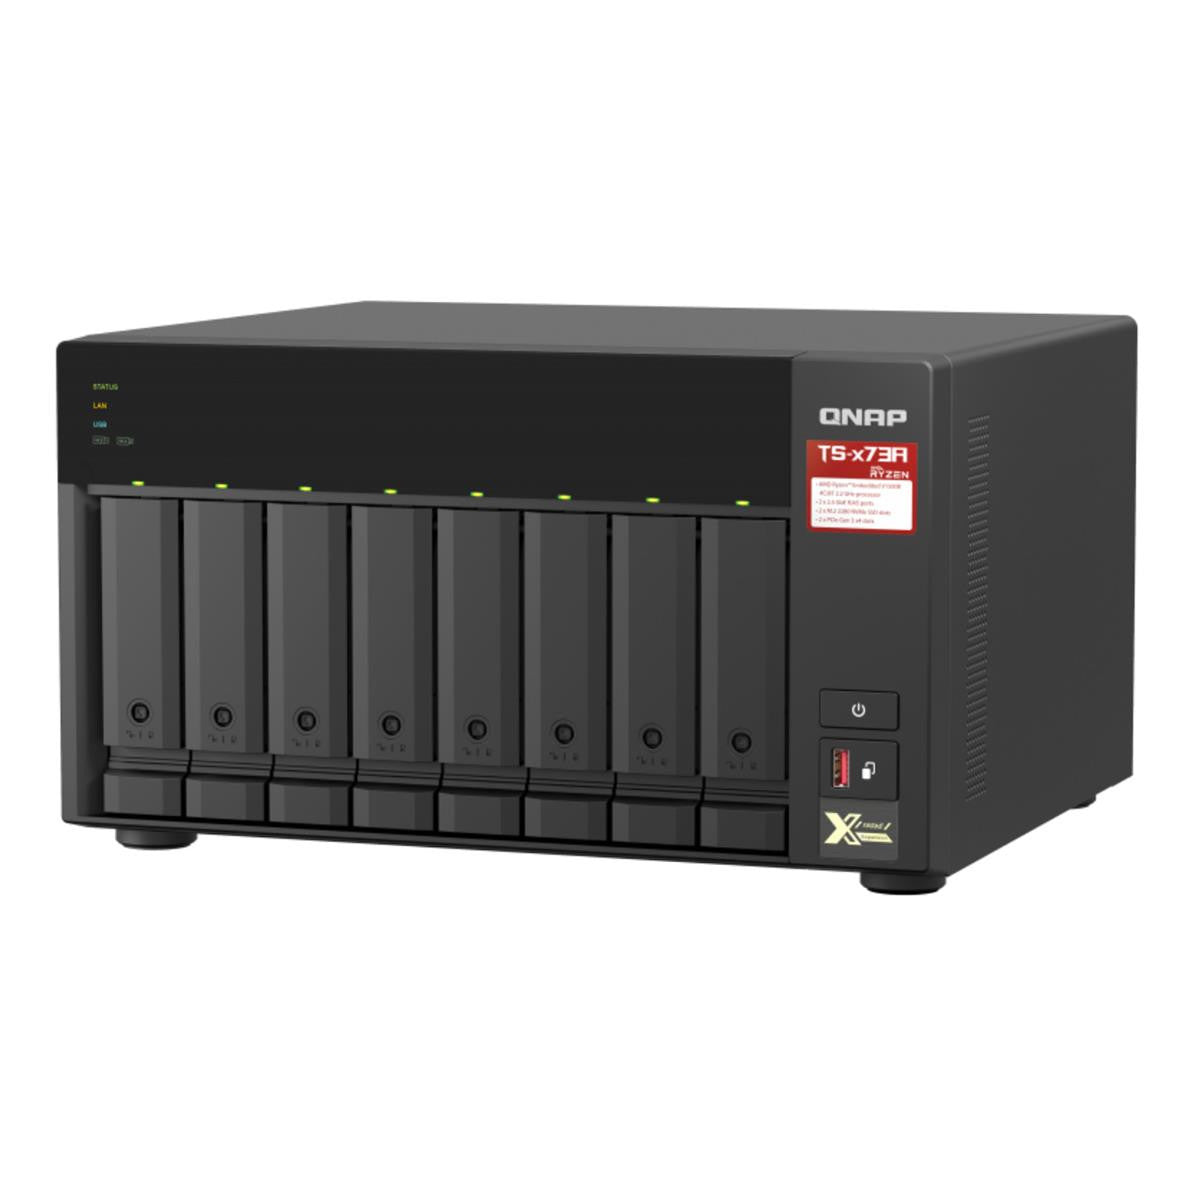 QNAP TS-873A 8-BAY NAS with 32GB DDR4 RAM and 16TB (8x2TB) Western Digital RED PLUS Drives Fully Assembled and Tested